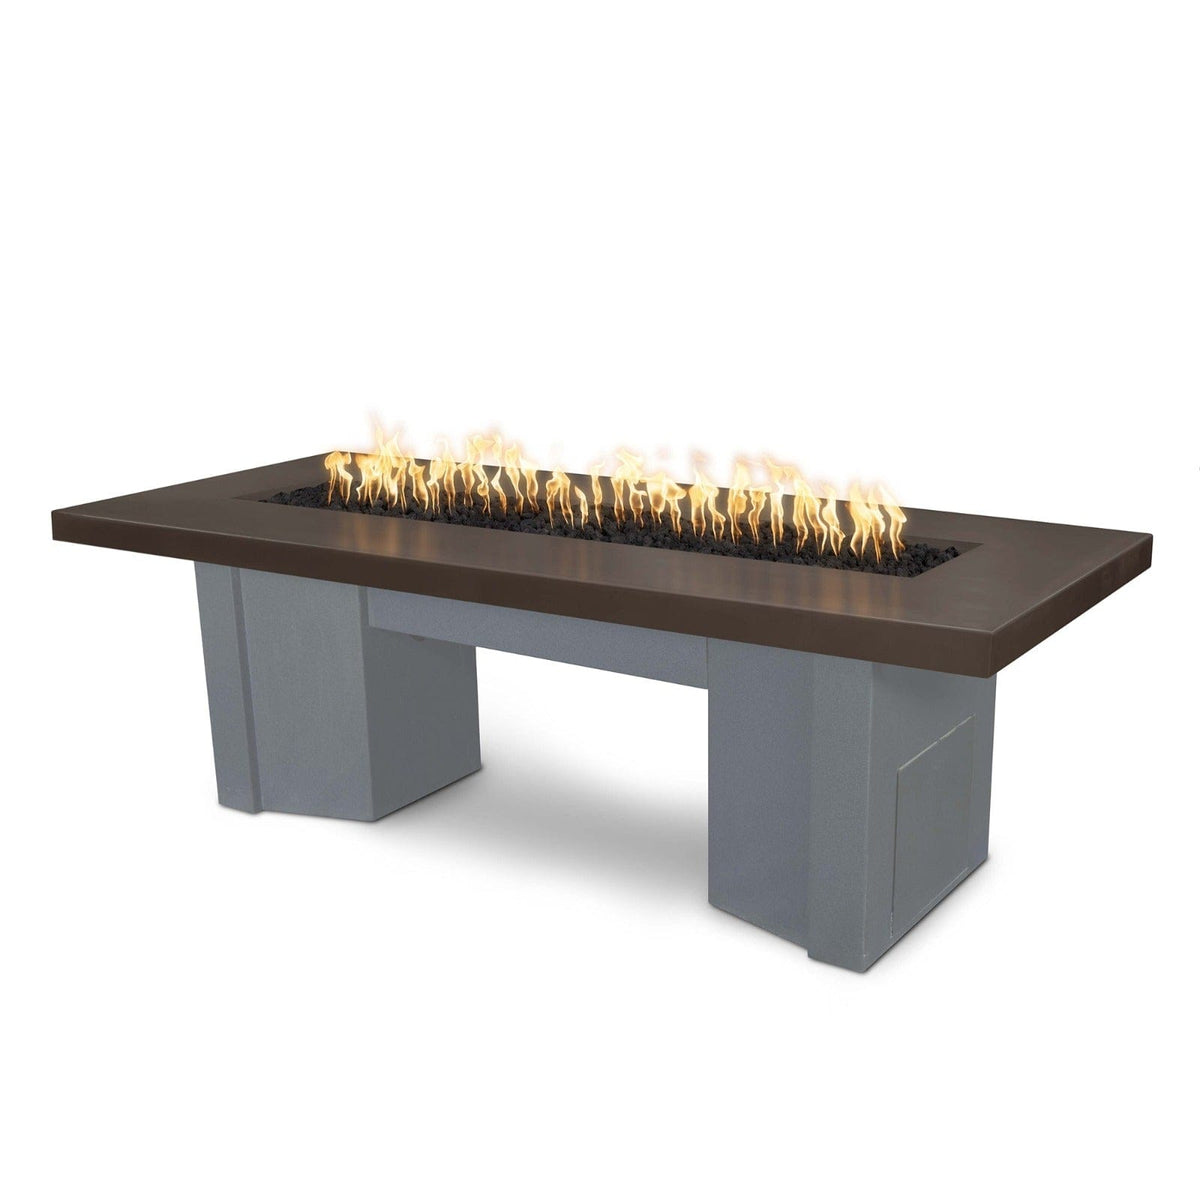 The Outdoor Plus Fire Features Chocolate (-CHC) / Gray Powder Coated Steel (-GRY) The Outdoor Plus 60&quot; Alameda Fire Table Smooth Concrete in Liquid Propane - Flame Sense System with Push Button Spark Igniter / OPT-ALMGFRC60FSEN-LP